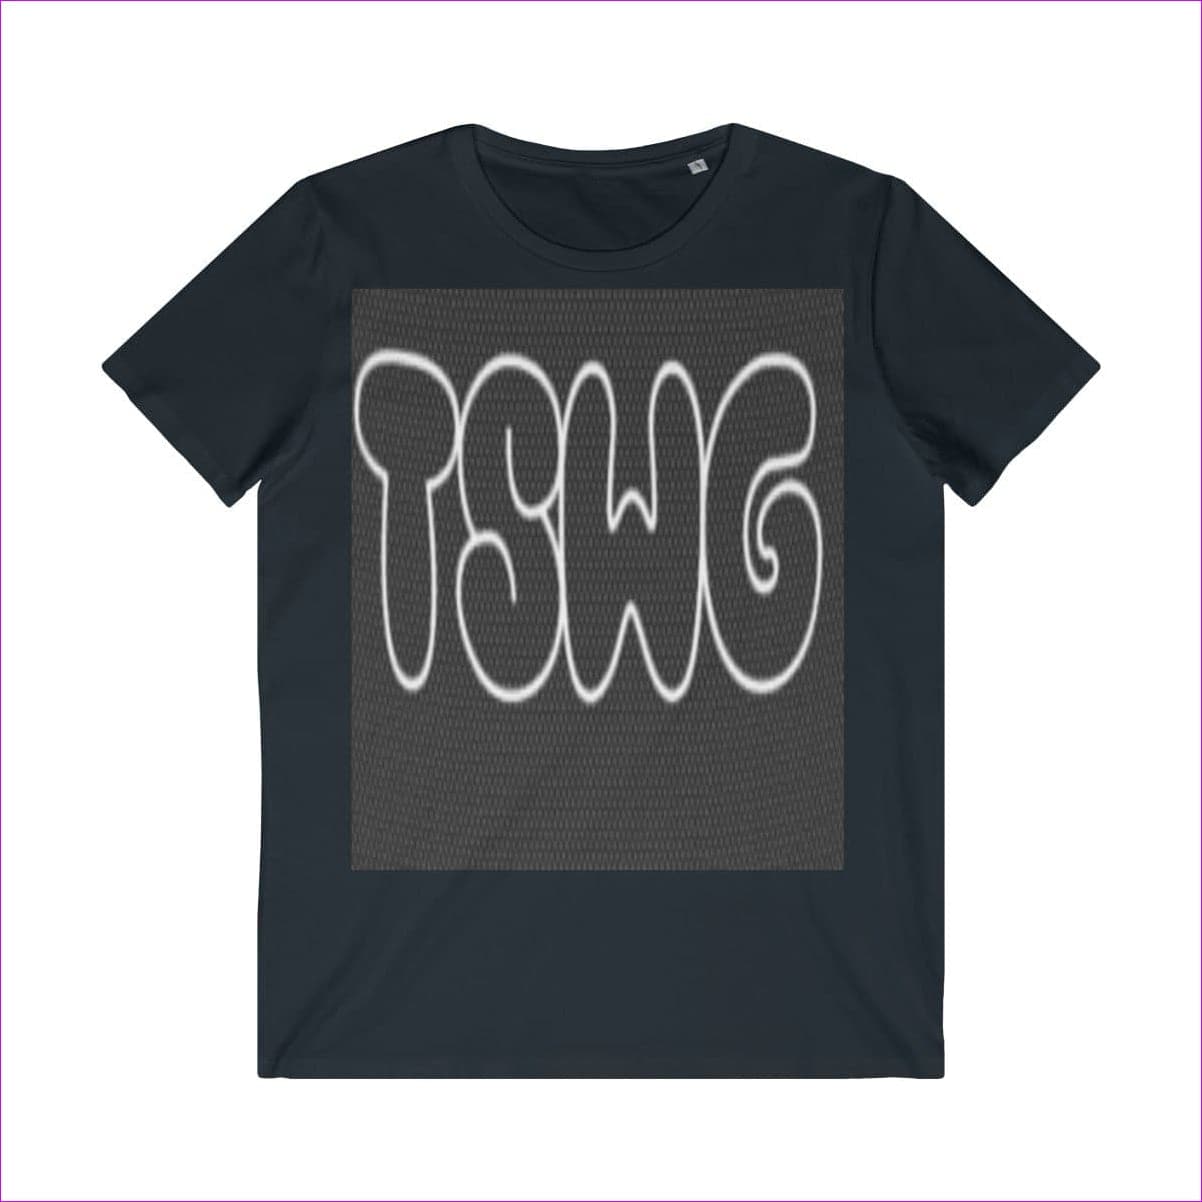 Black TSWG ( Tough Smooth Well Groomed) Men's Organic Tee - T-Shirt at TFC&H Co.